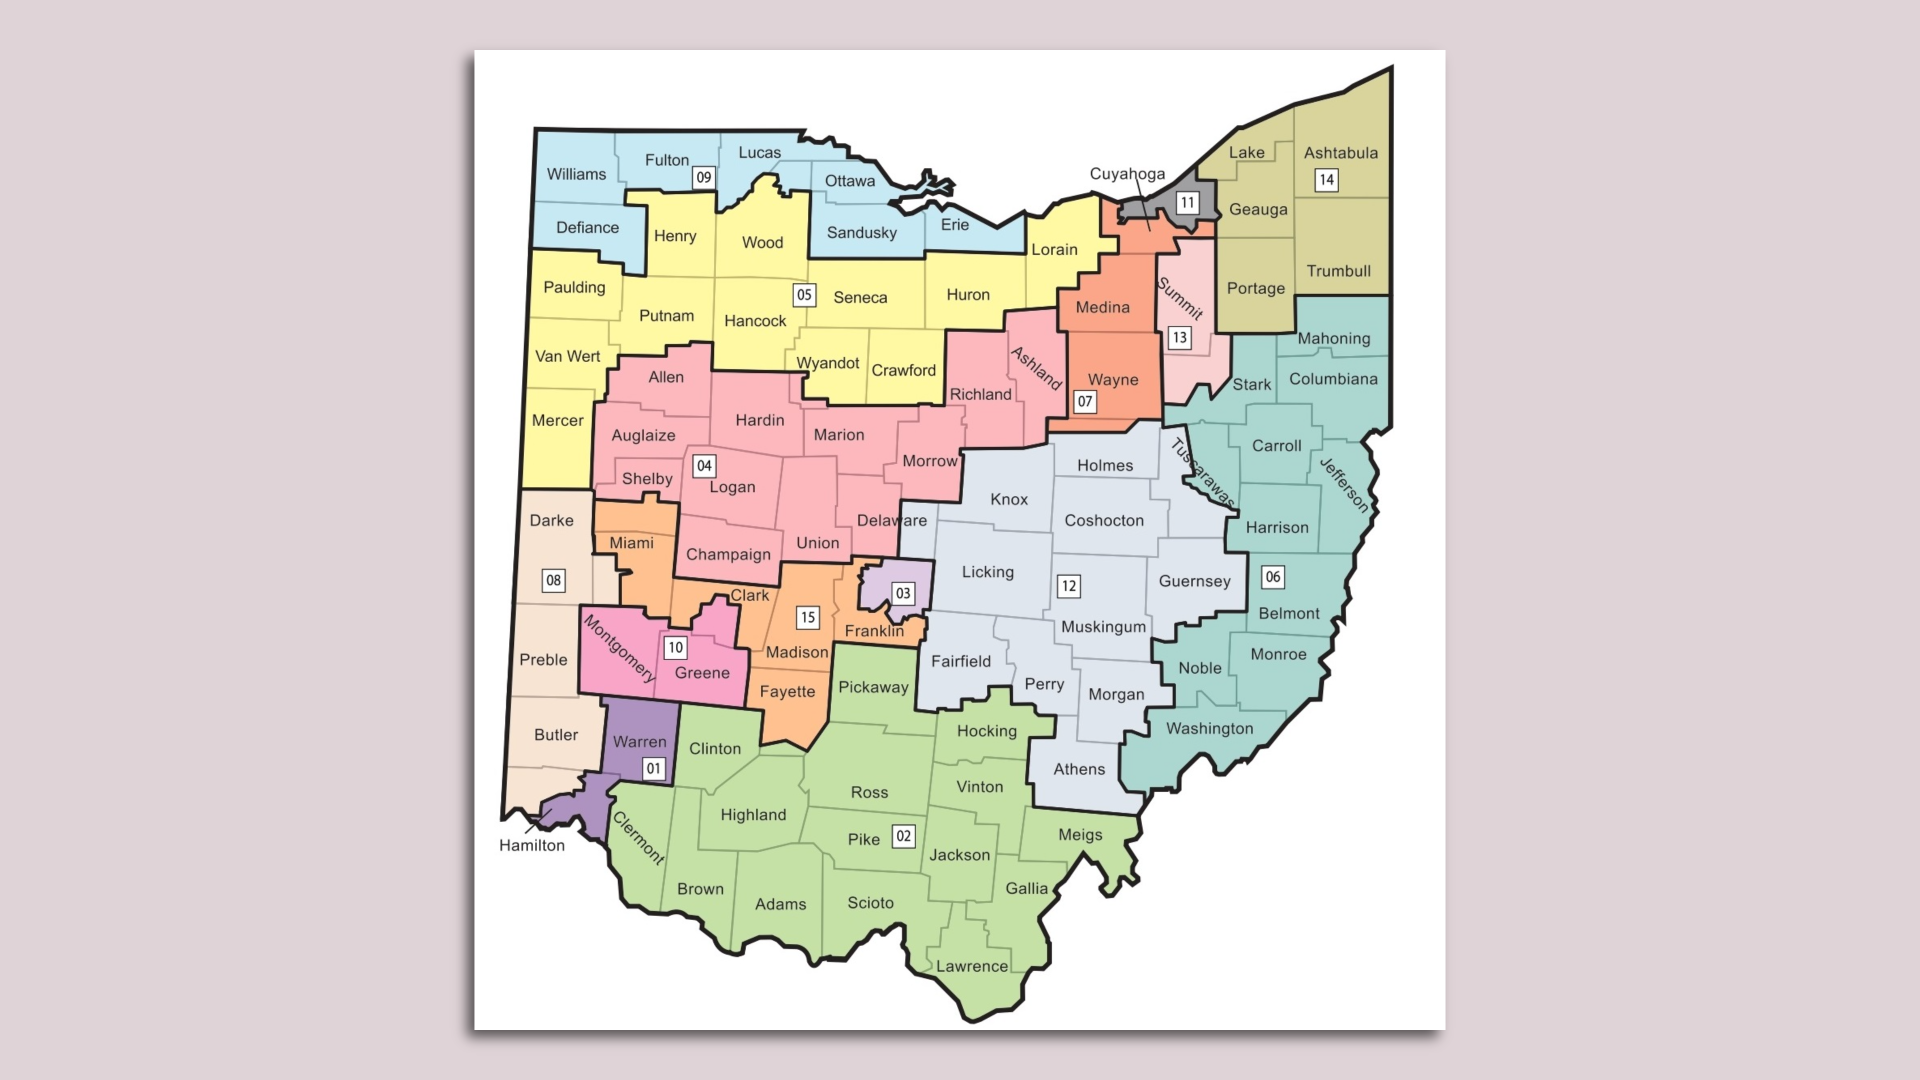 The Ohio congressional district map.